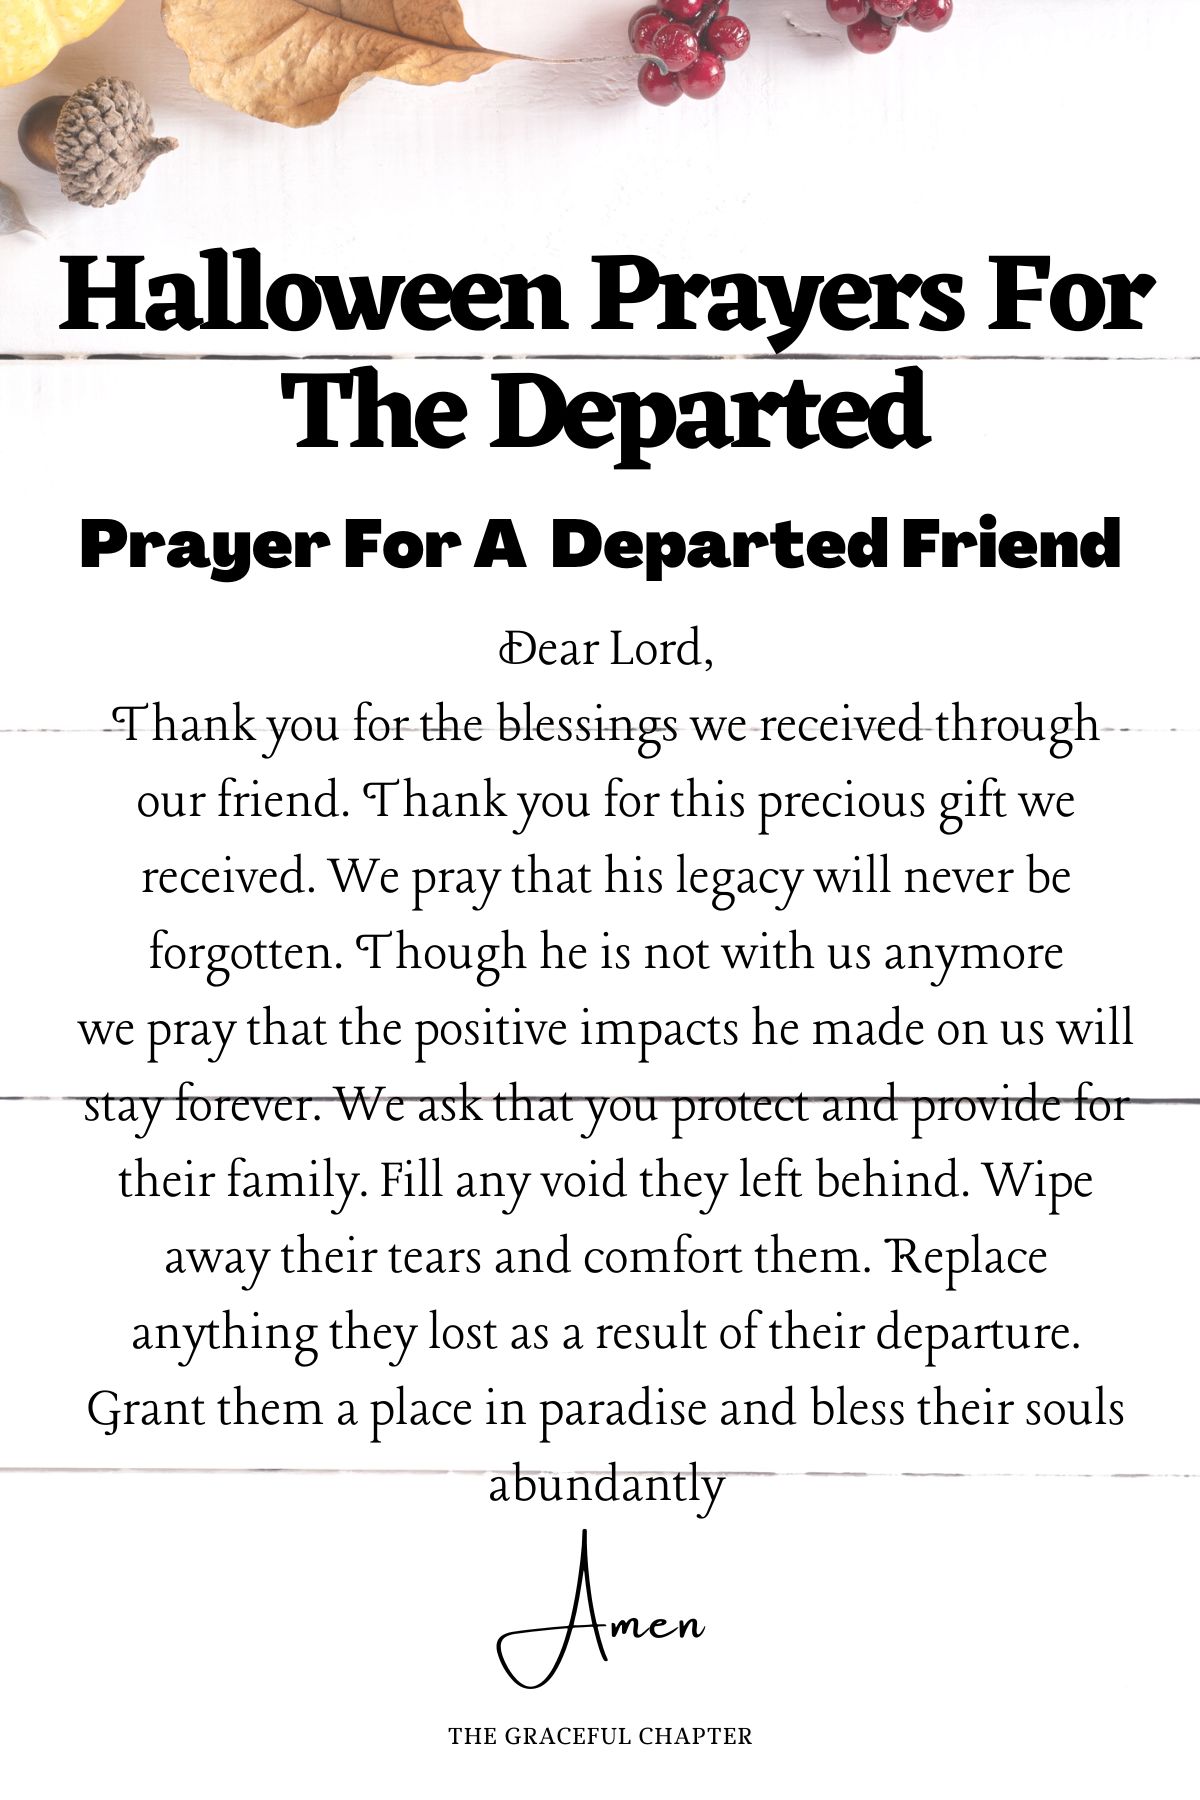 Prayer for a departed friend